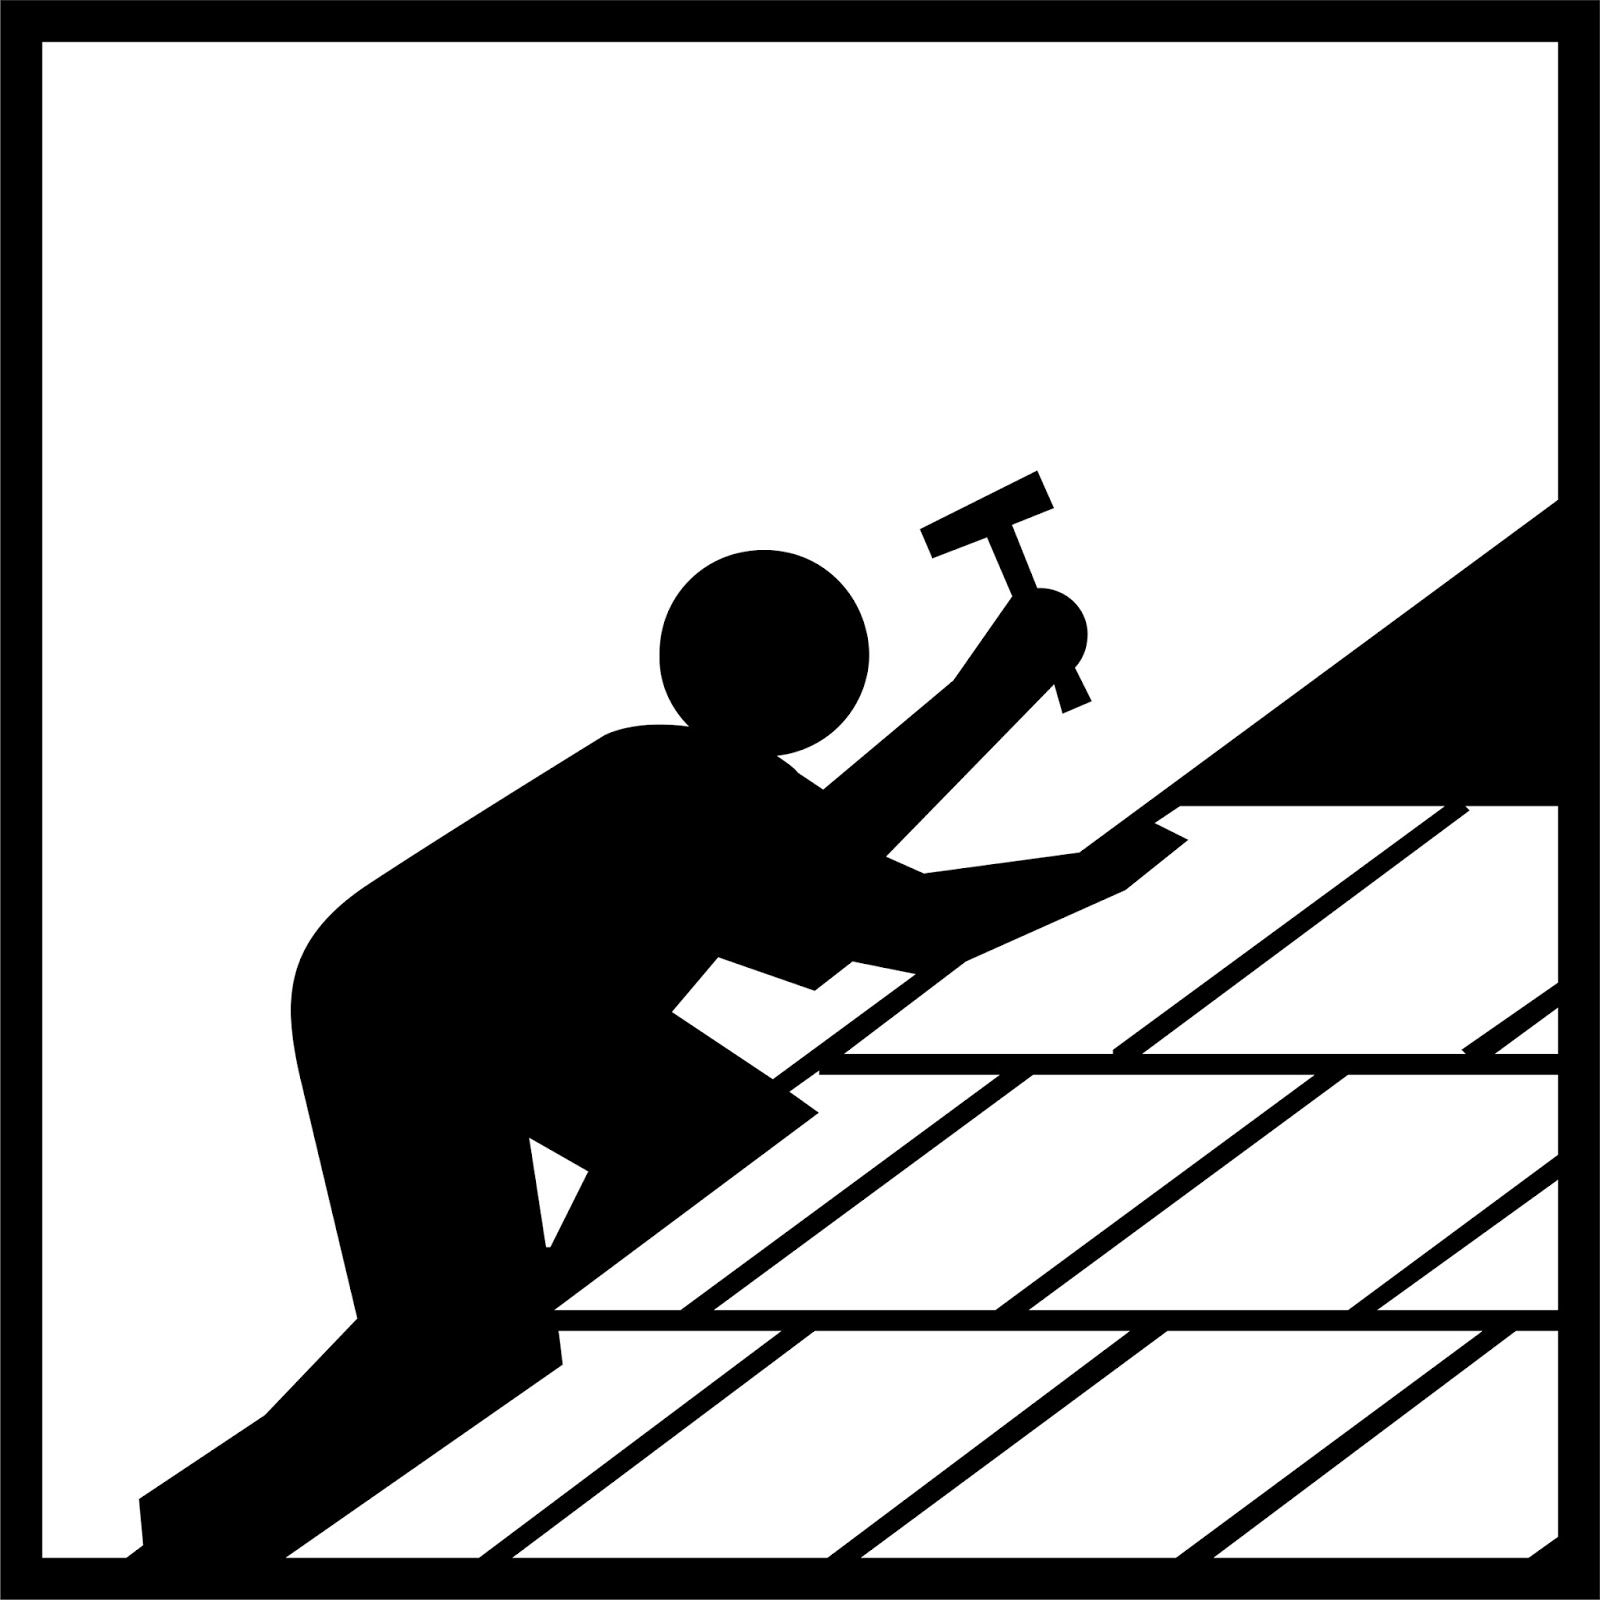 Free Roofer Cliparts, Download Free Clip Art, Free Clip Art